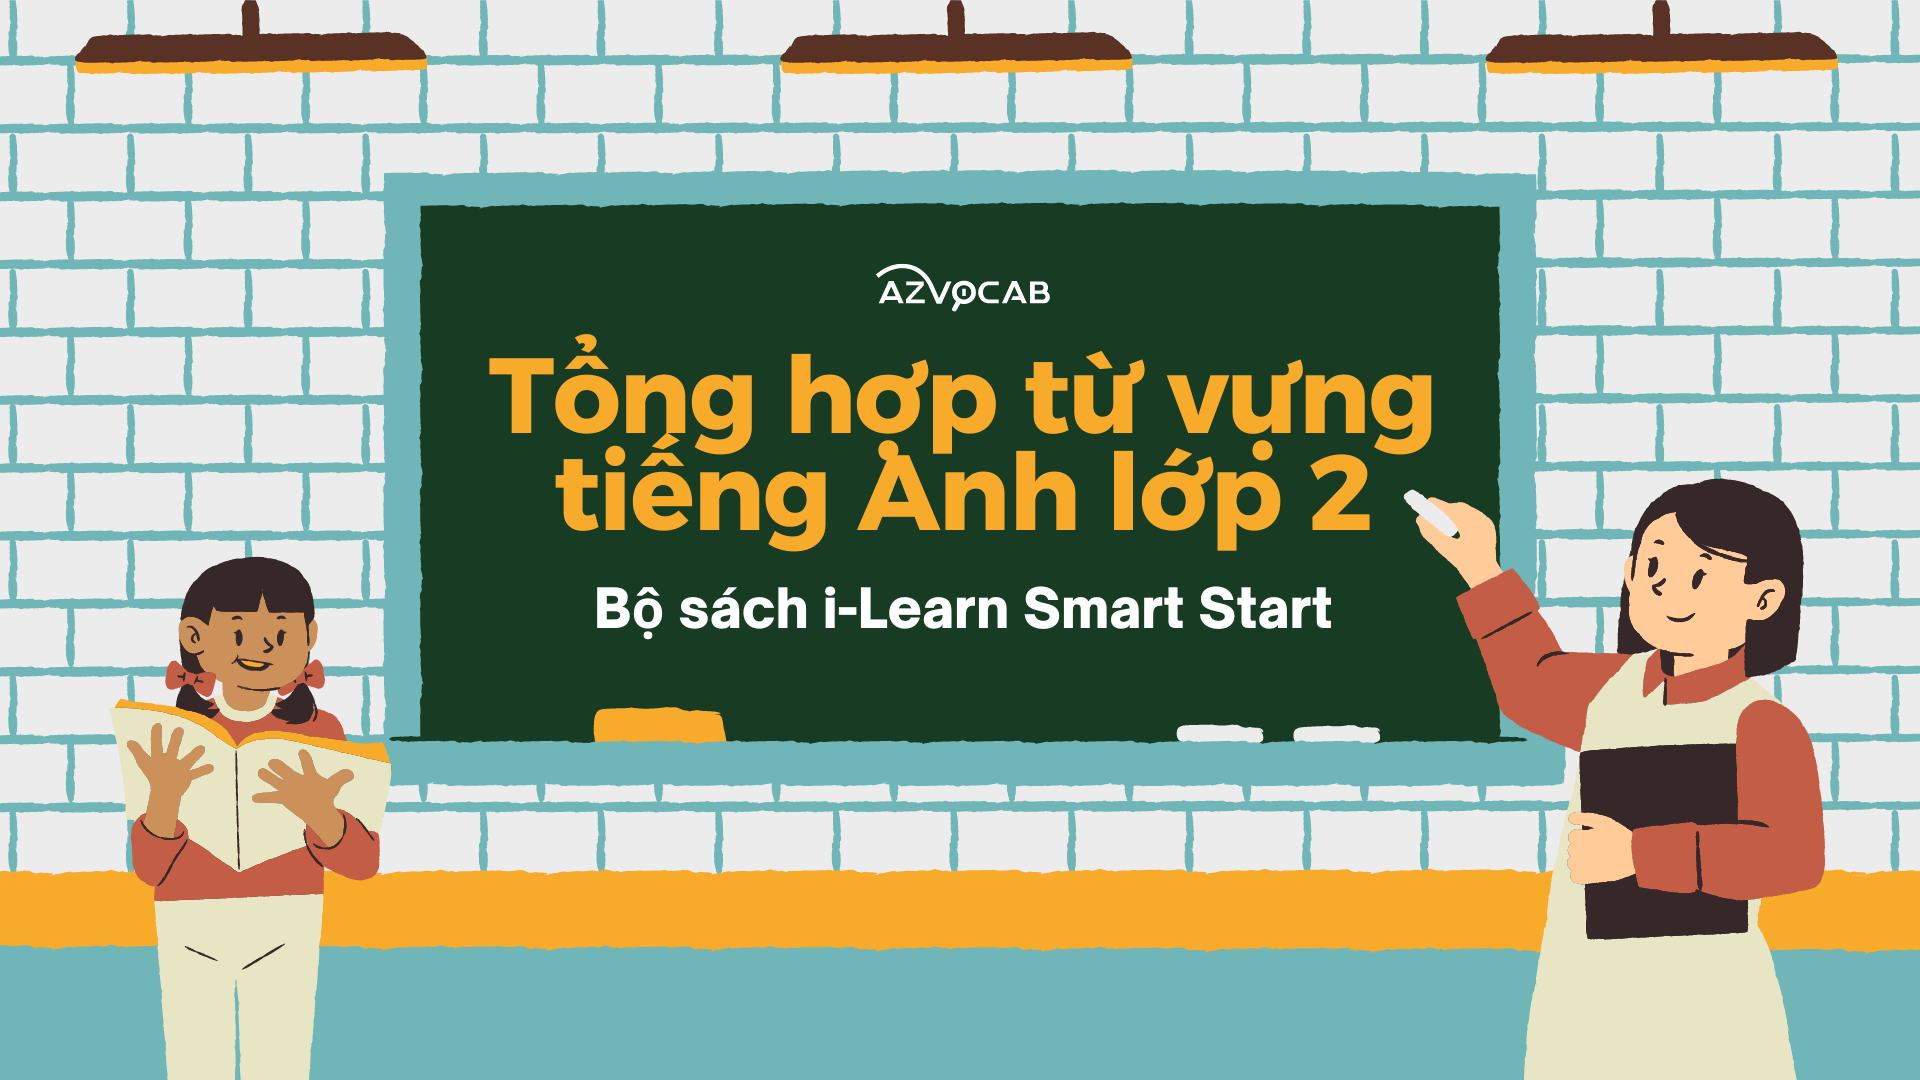 Tiếng Anh lớp 2 i-Learn Smart Start